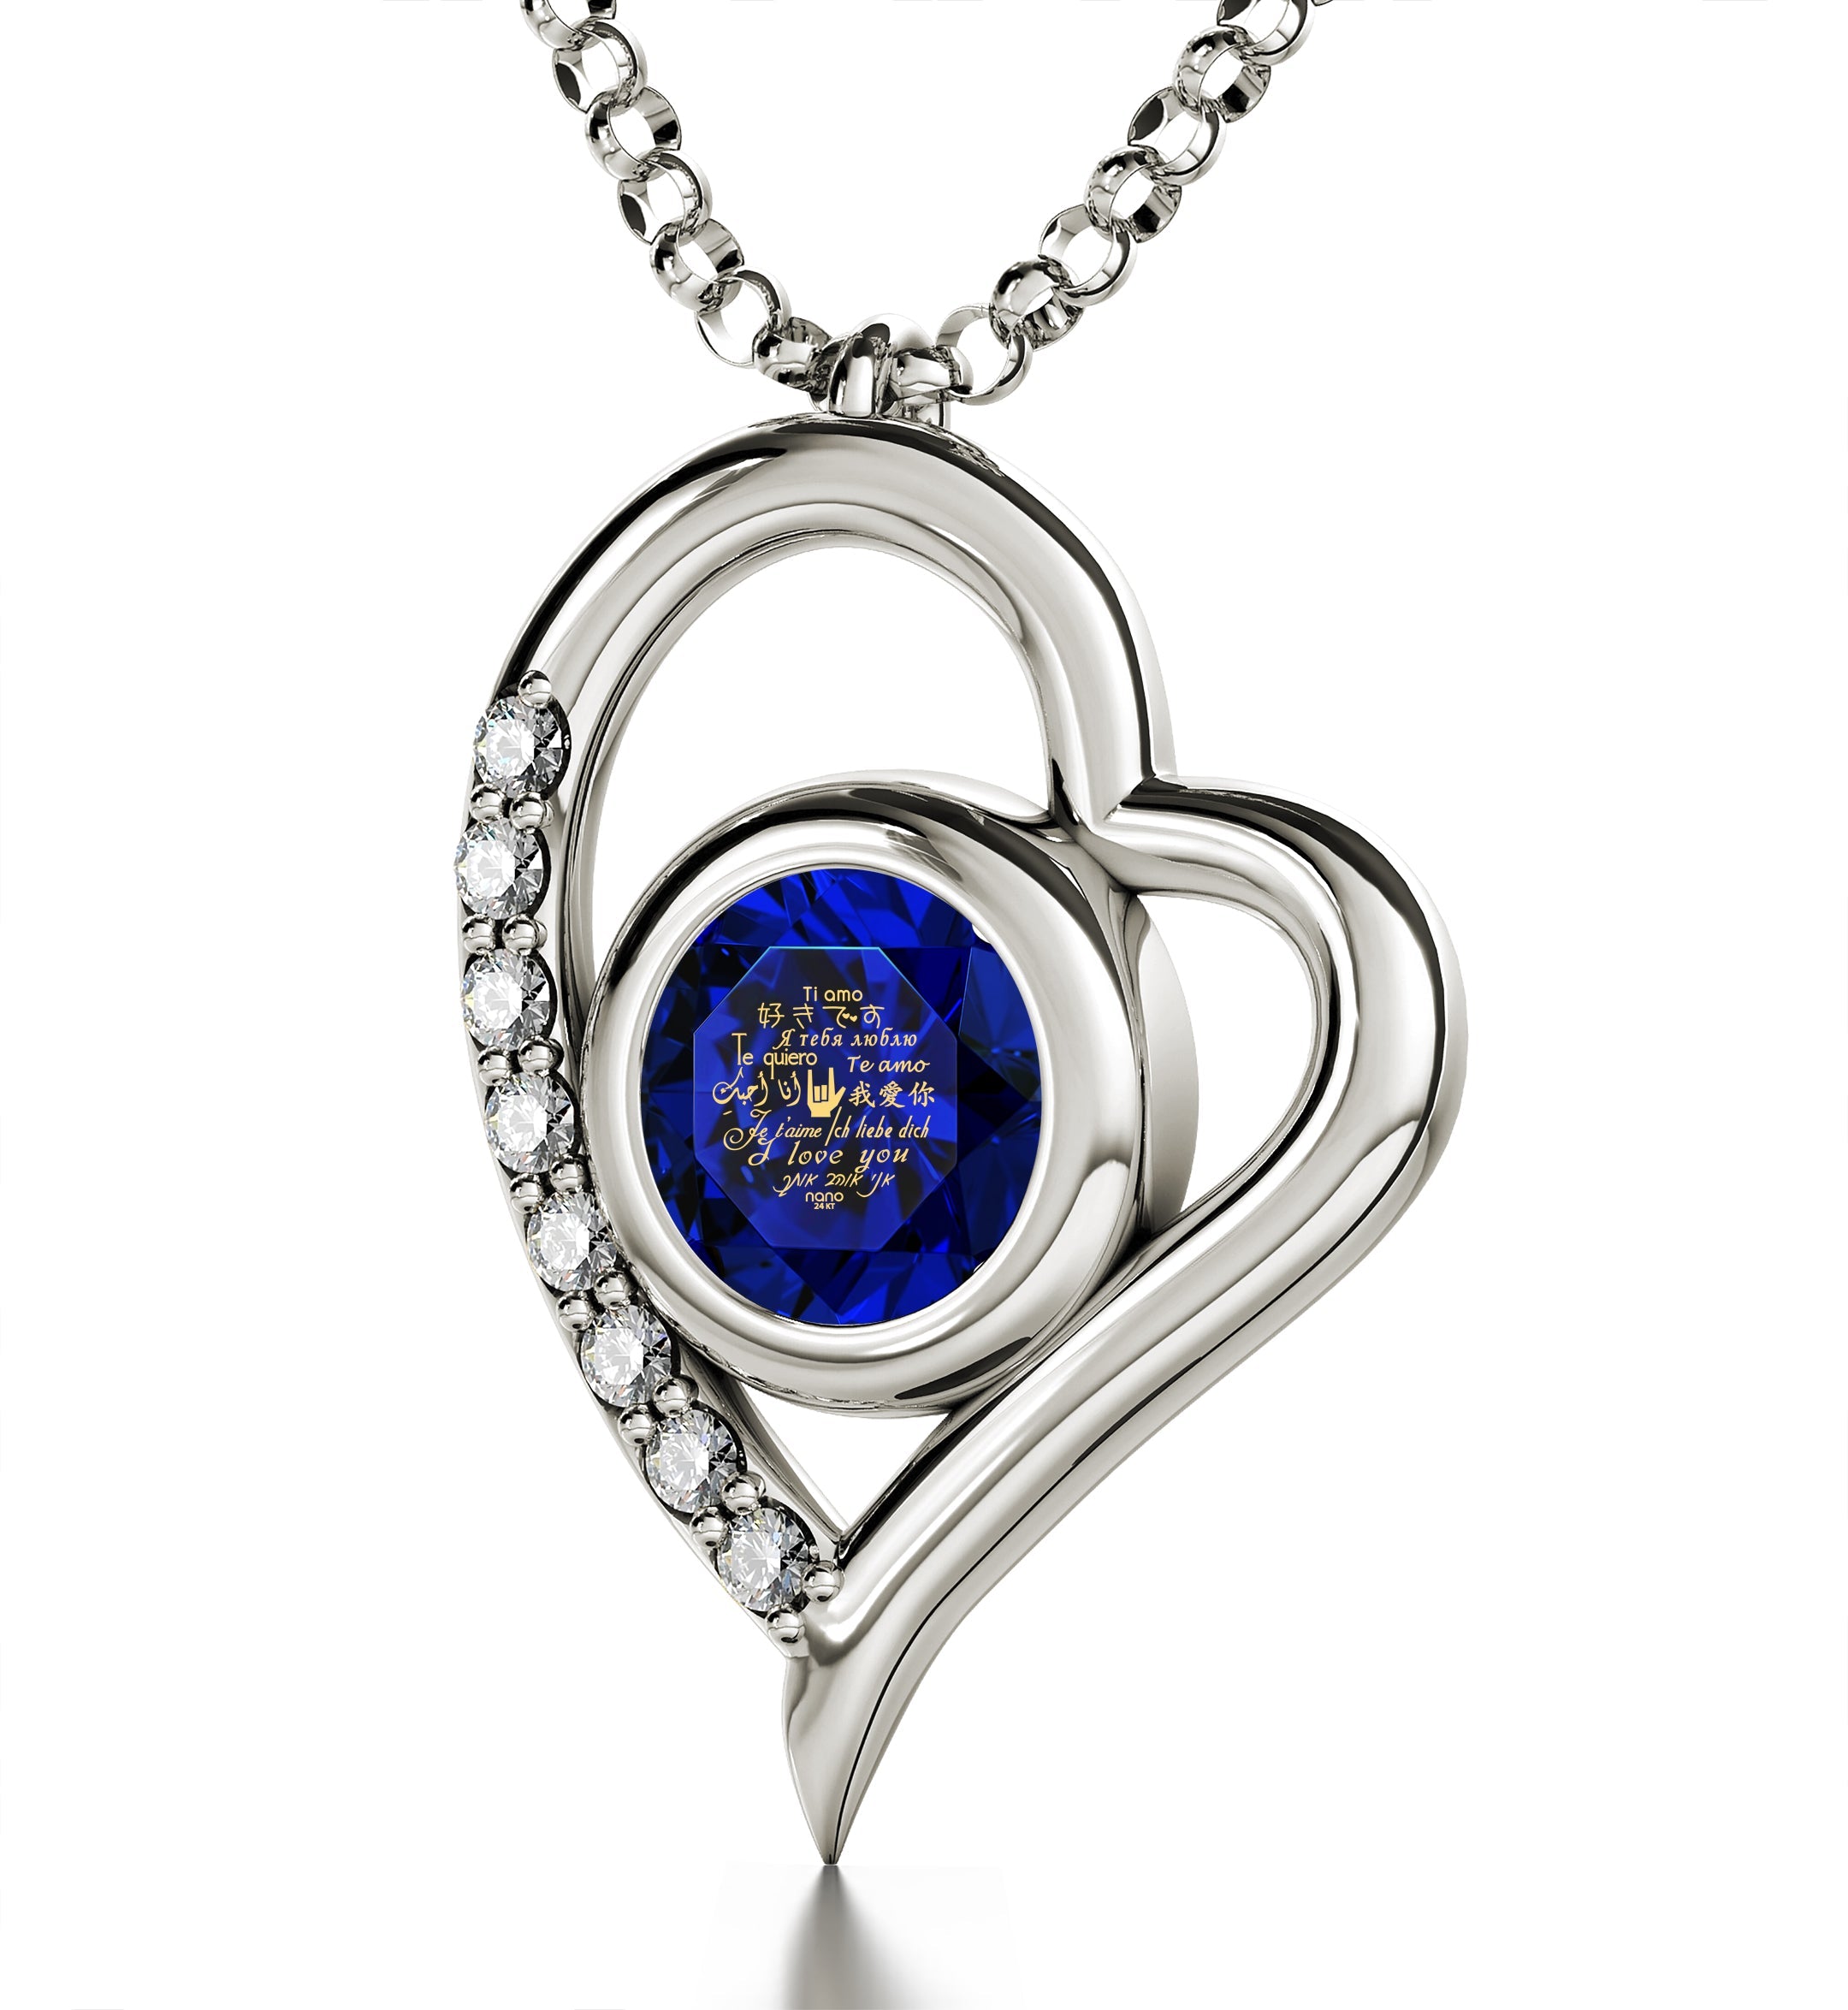 Close-up of a 925 Sterling Silver I Love You Heart Pendant Necklace with a blue gemstone engraved with "i love you" in multiple languages, encased in a silver setting.